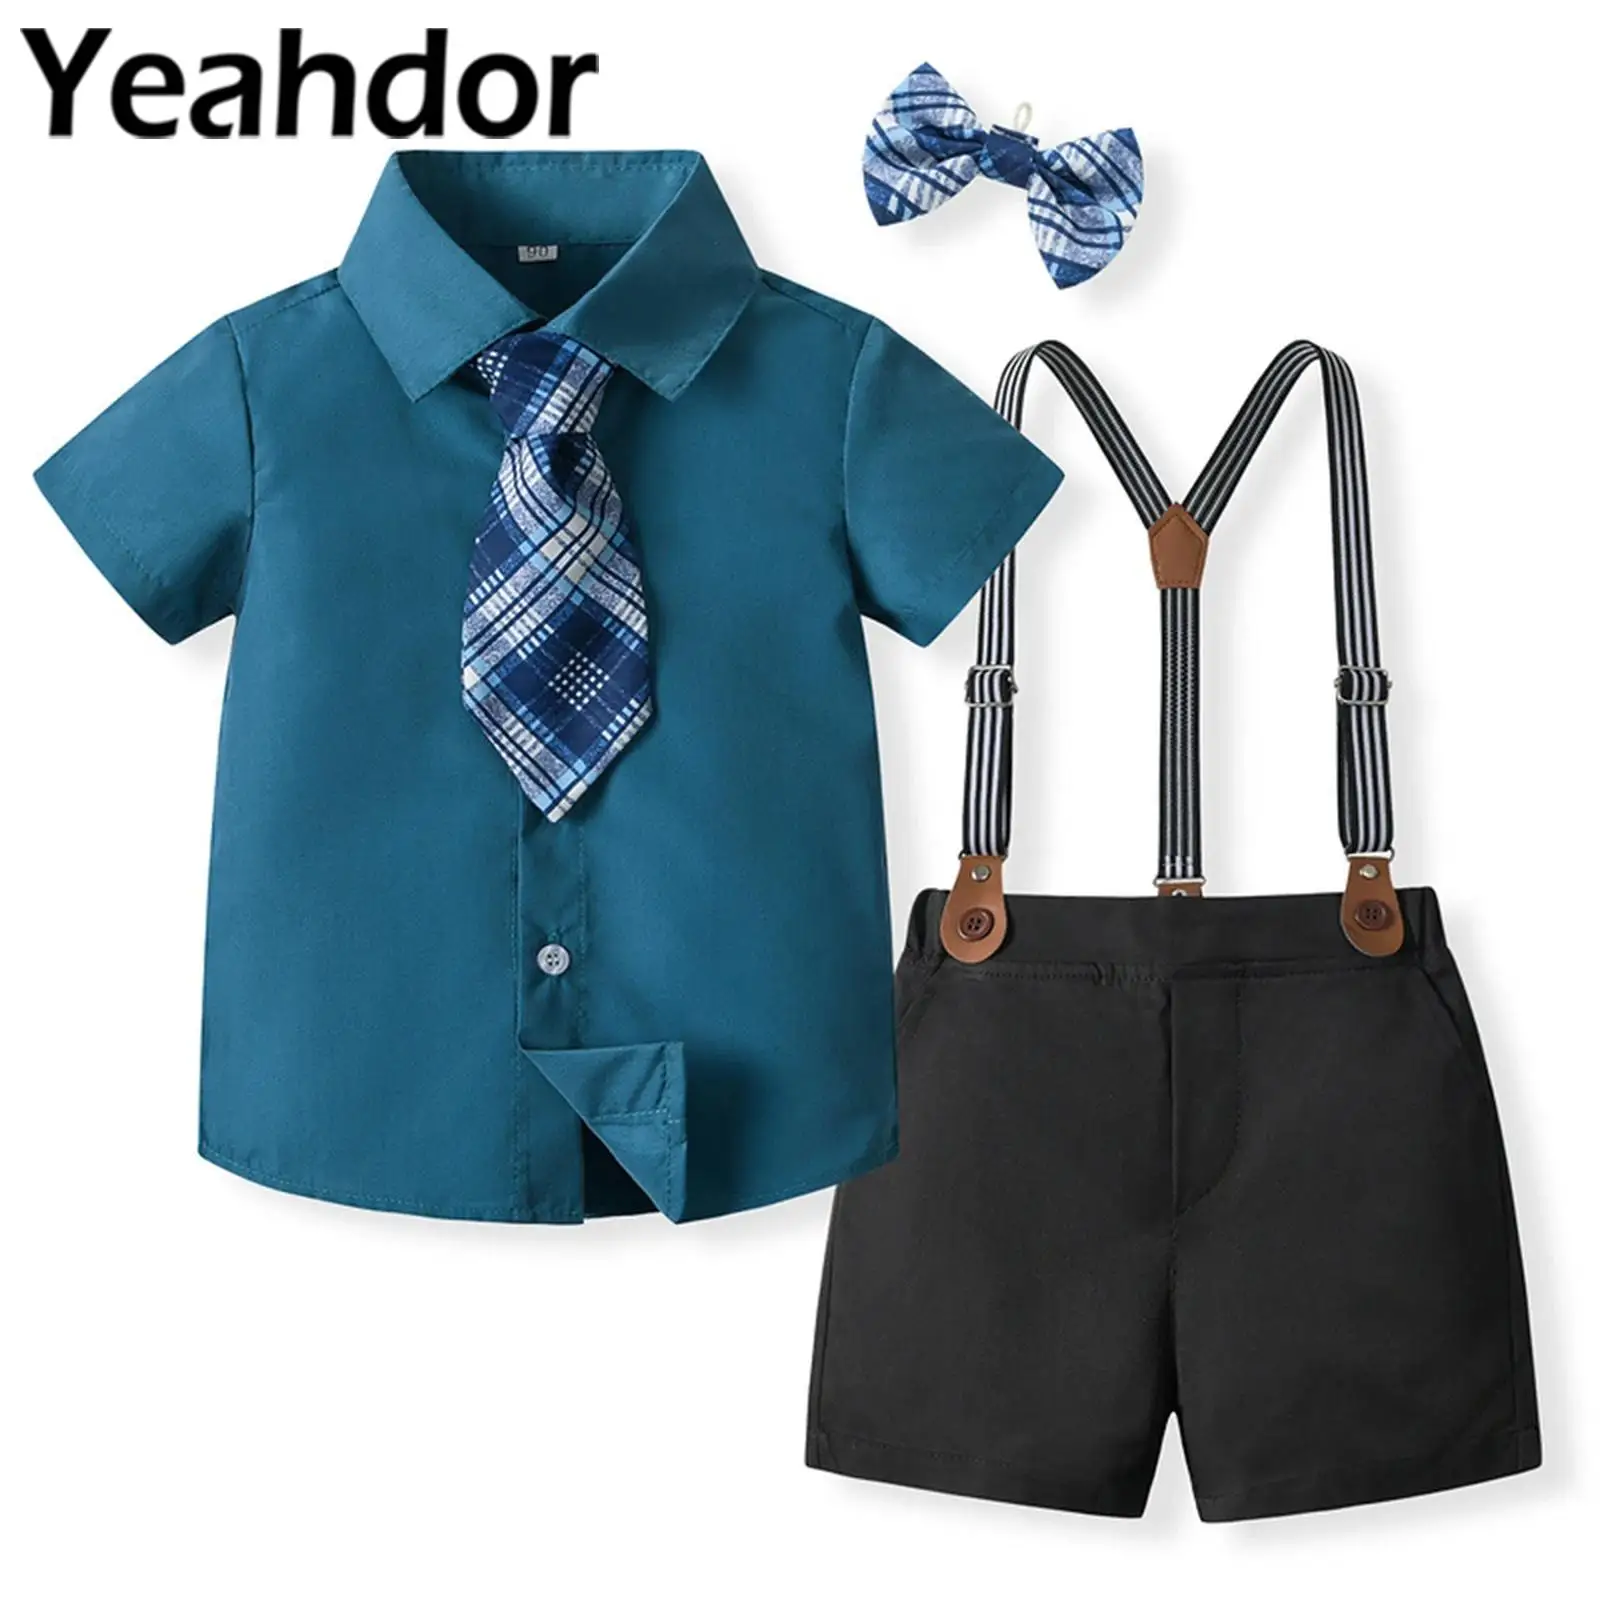 

Kids Boys British Style Formal Suit Gentleman Outfit Formal Wedding Suits for Birthday Party Baptism Baby's Clothing Sets